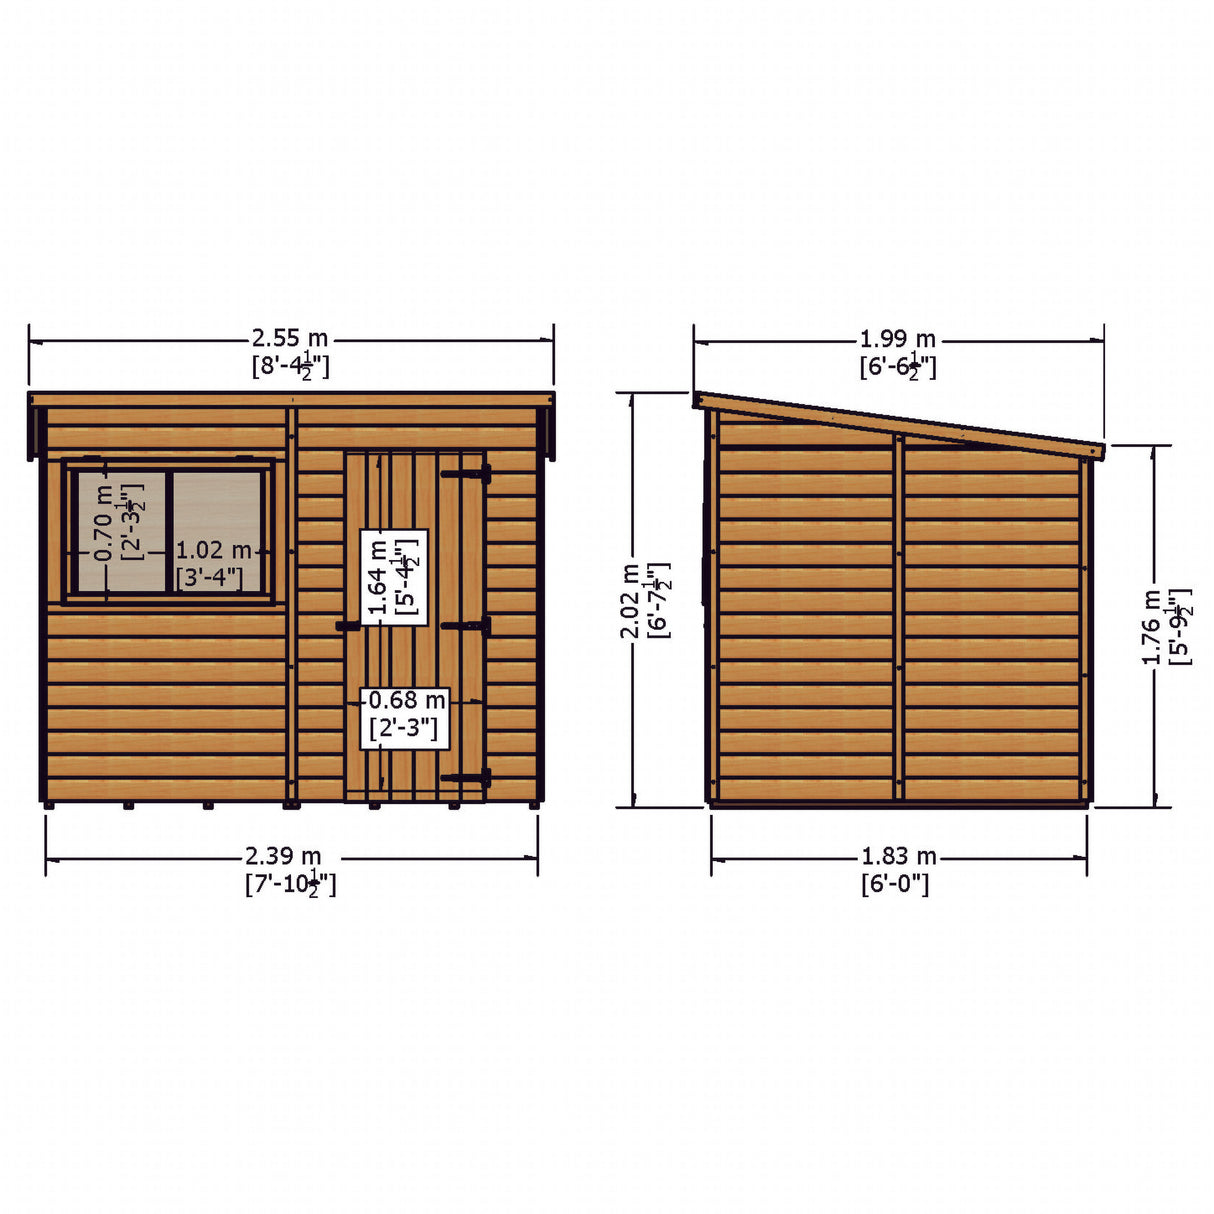 Shire Pent Shed 8x6